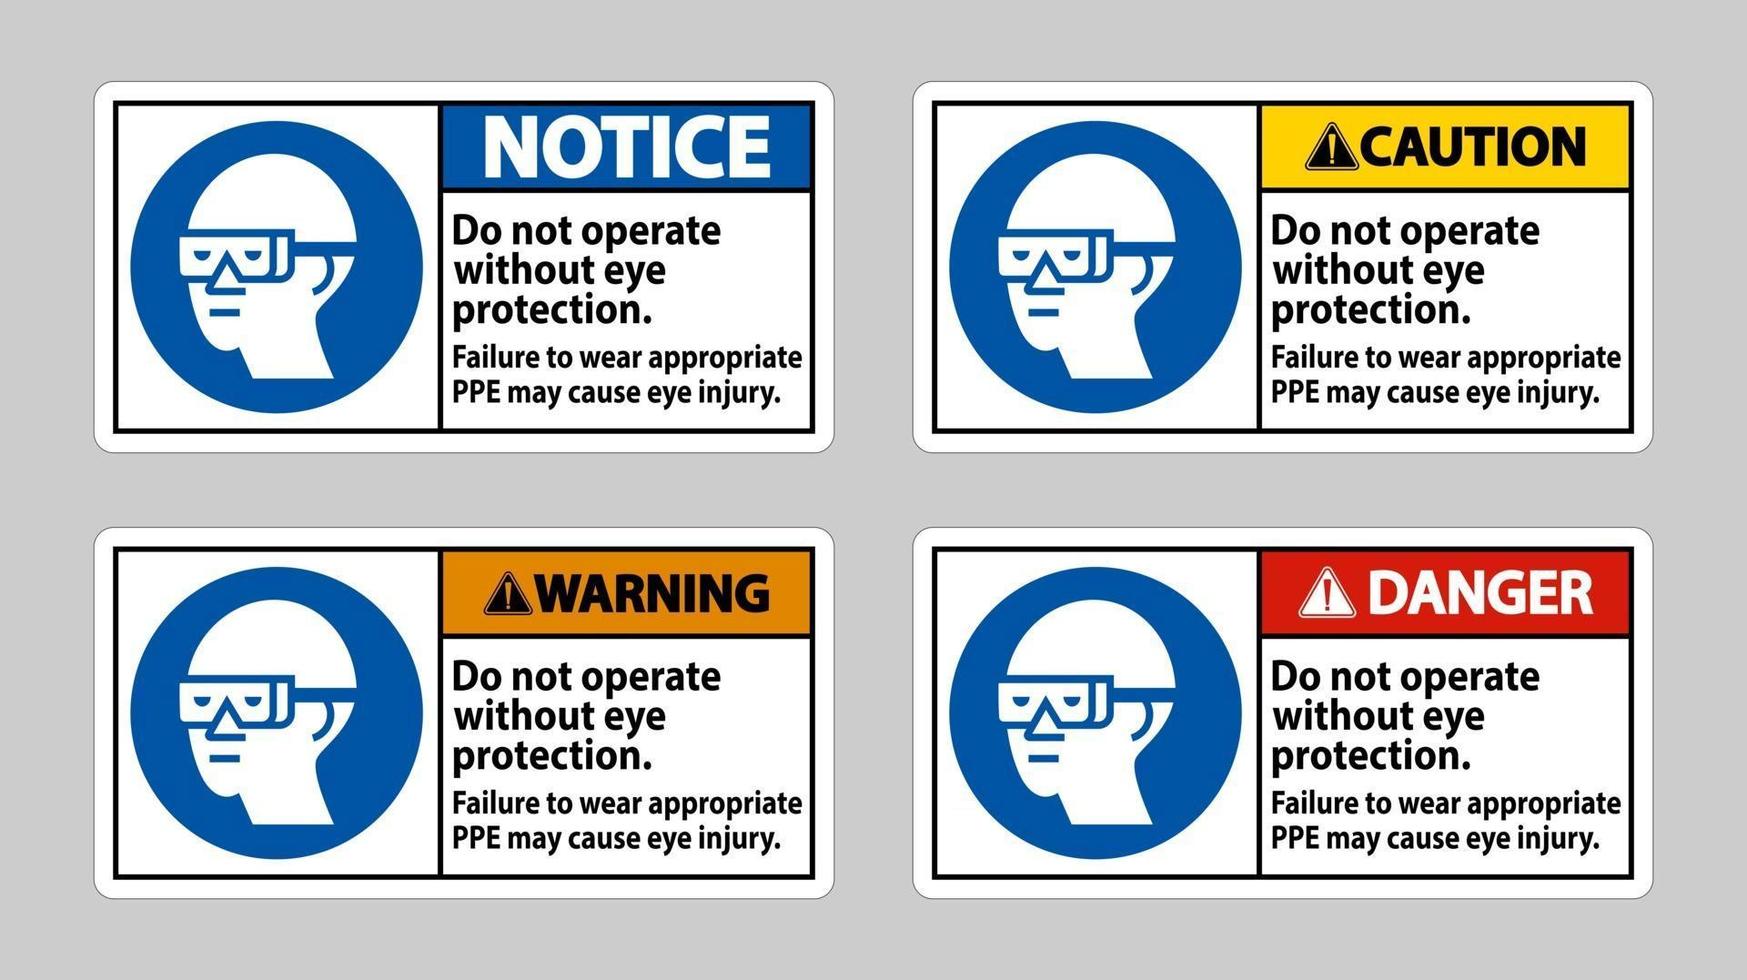 Do Not Operate Without Eye Protection Failure To Wear Appropriate PPE May Cause Eye Injury vector